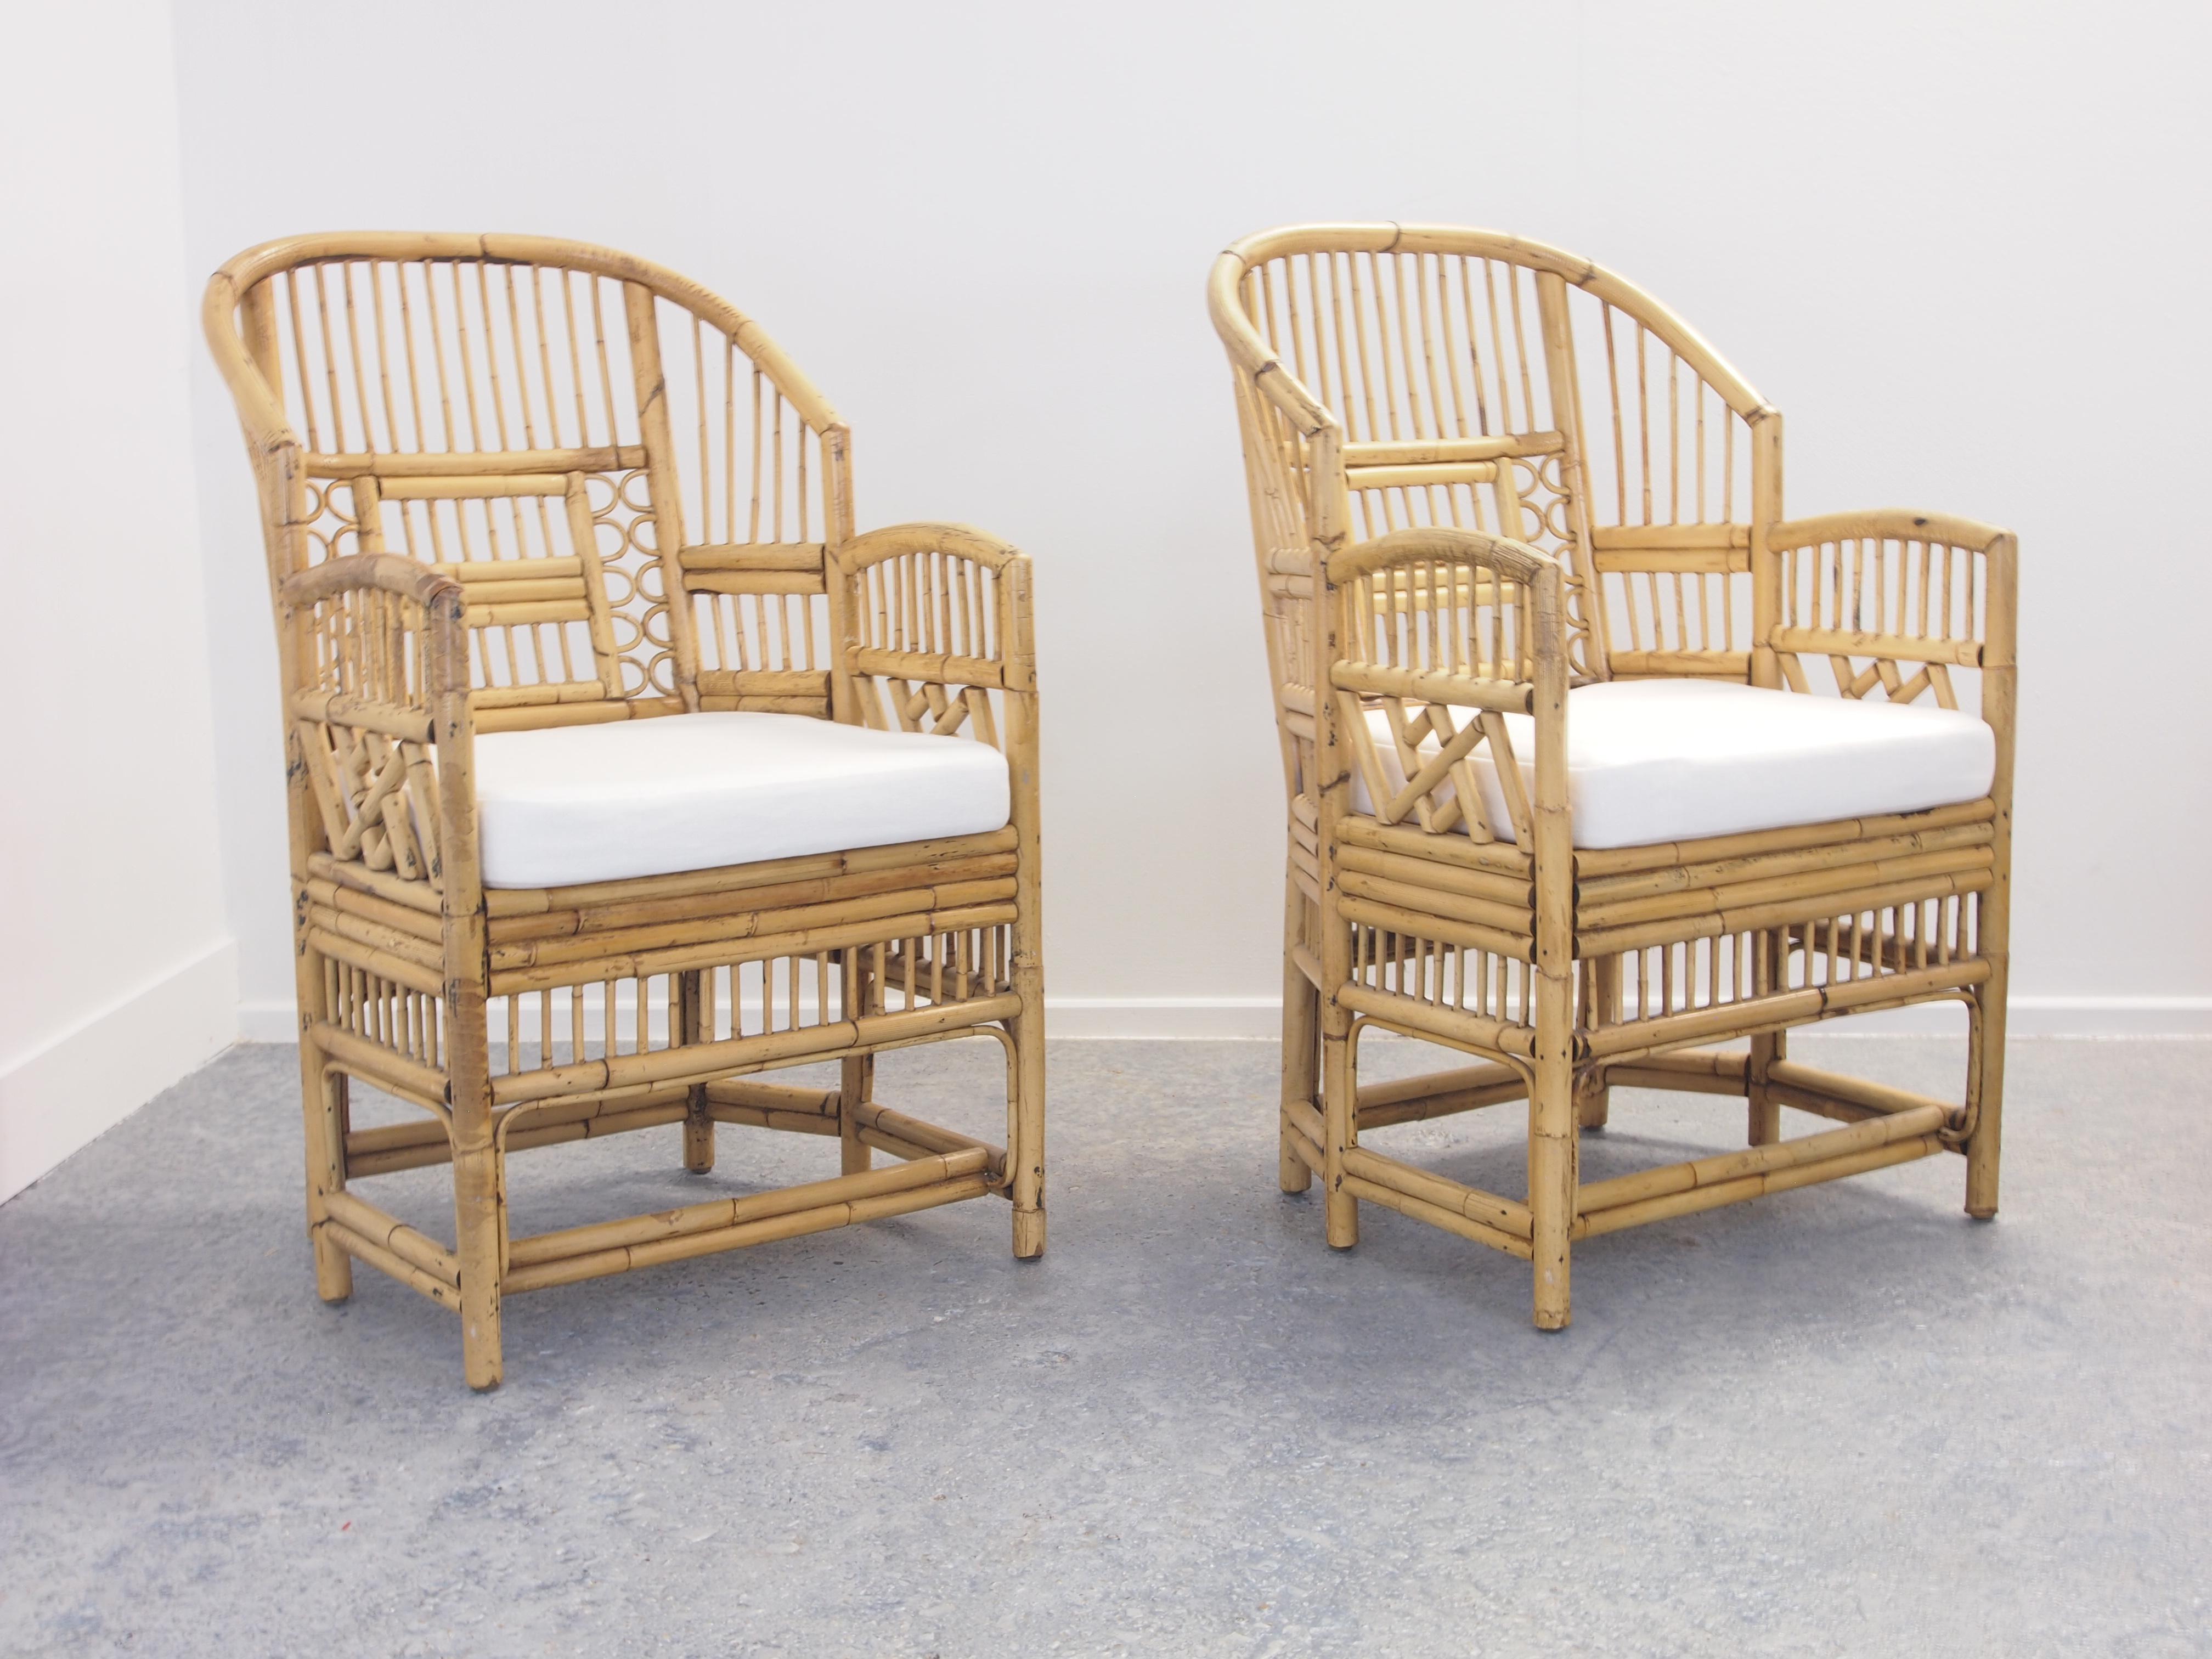 Stunning pair vintage midcentury rattan with wicker Chinese Chippendale/chinoiserie chique/Brighton Pavilion rattan chairs.

Condition: In good vintage condition; normal wear and tear conform its age. New upholstered white cotton